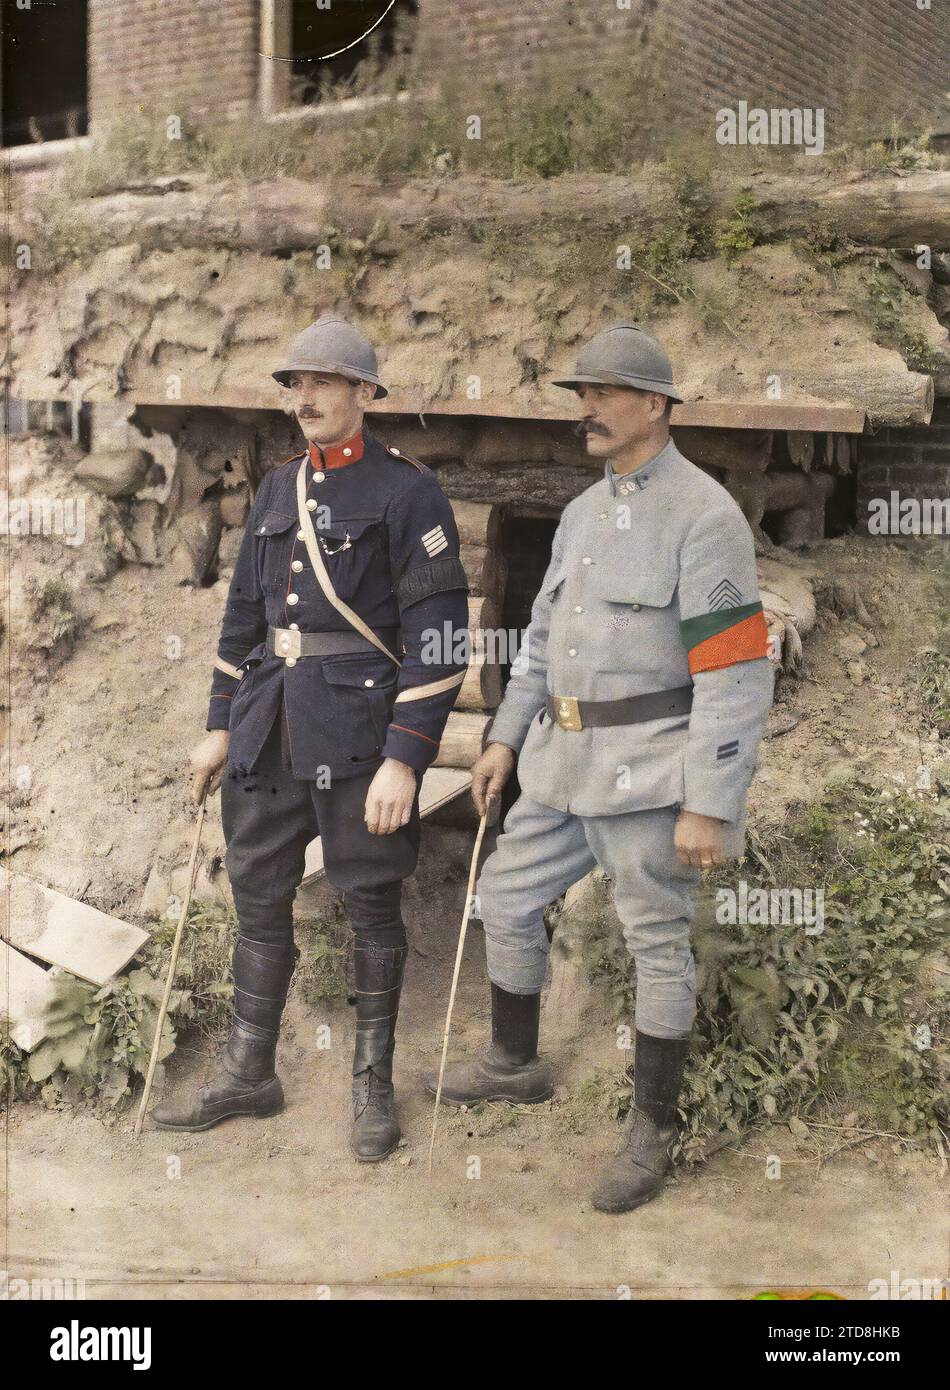 Woesten, Belgium, First World War, Clothing, Human Beings, Rear Front, Military Uniform, Portrait, Police Officer, Gendarme, Man, Belgium, Woesten, Belgian Gendarme and aide French Gendarme, Woesten, France [in connection with], 25/08/1917 - 25/08/1917, Castelnau, Paul, 1917 - Nord de la France, Belgique - Paul Castelnau (Photographic section of the army) - (1-5 September), Autochrome, photo, Glass, Autochrome, photo, Positive Stock Photo